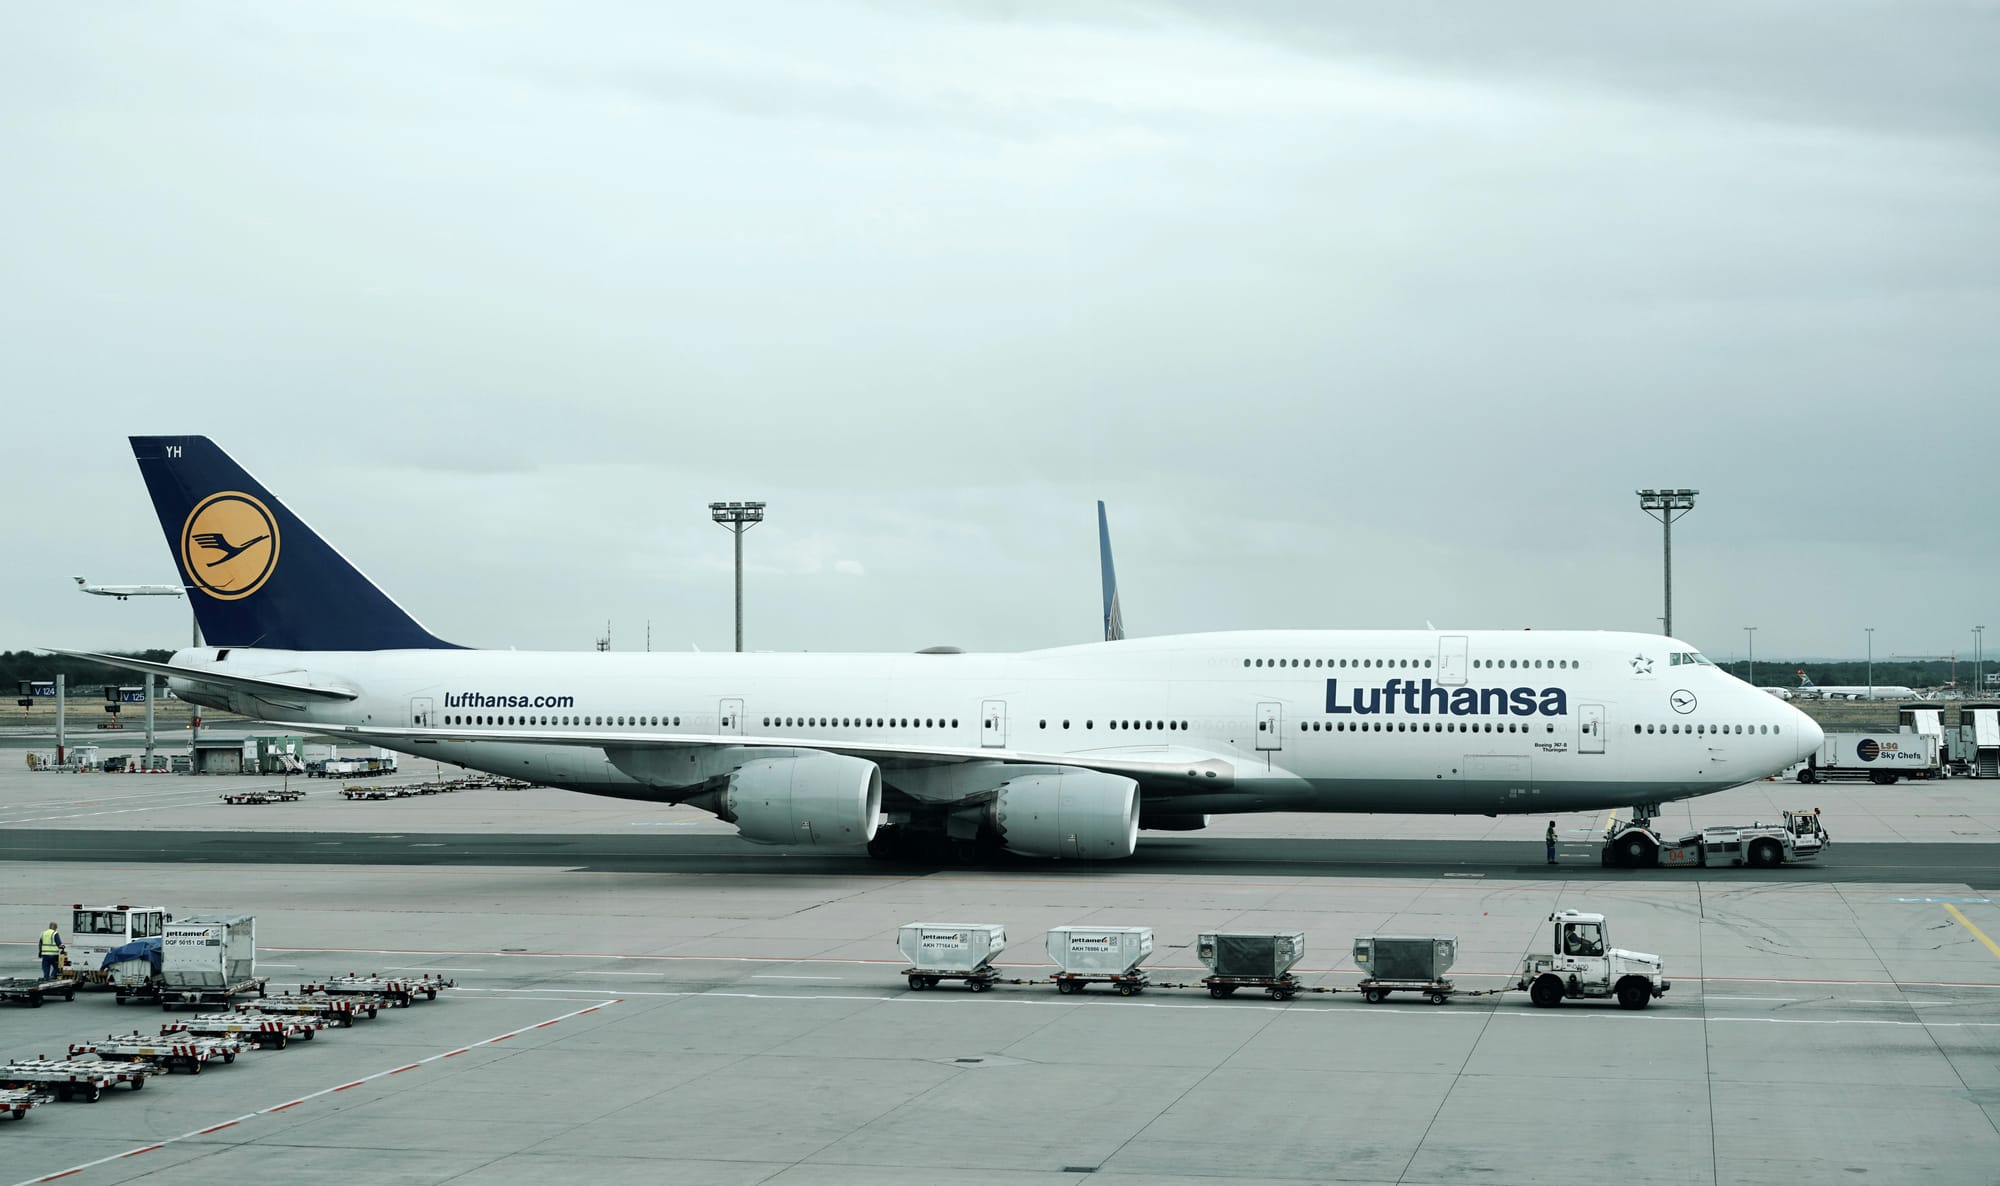 The Queen of the Skies No More: Why the Boeing 747 Era Is Over